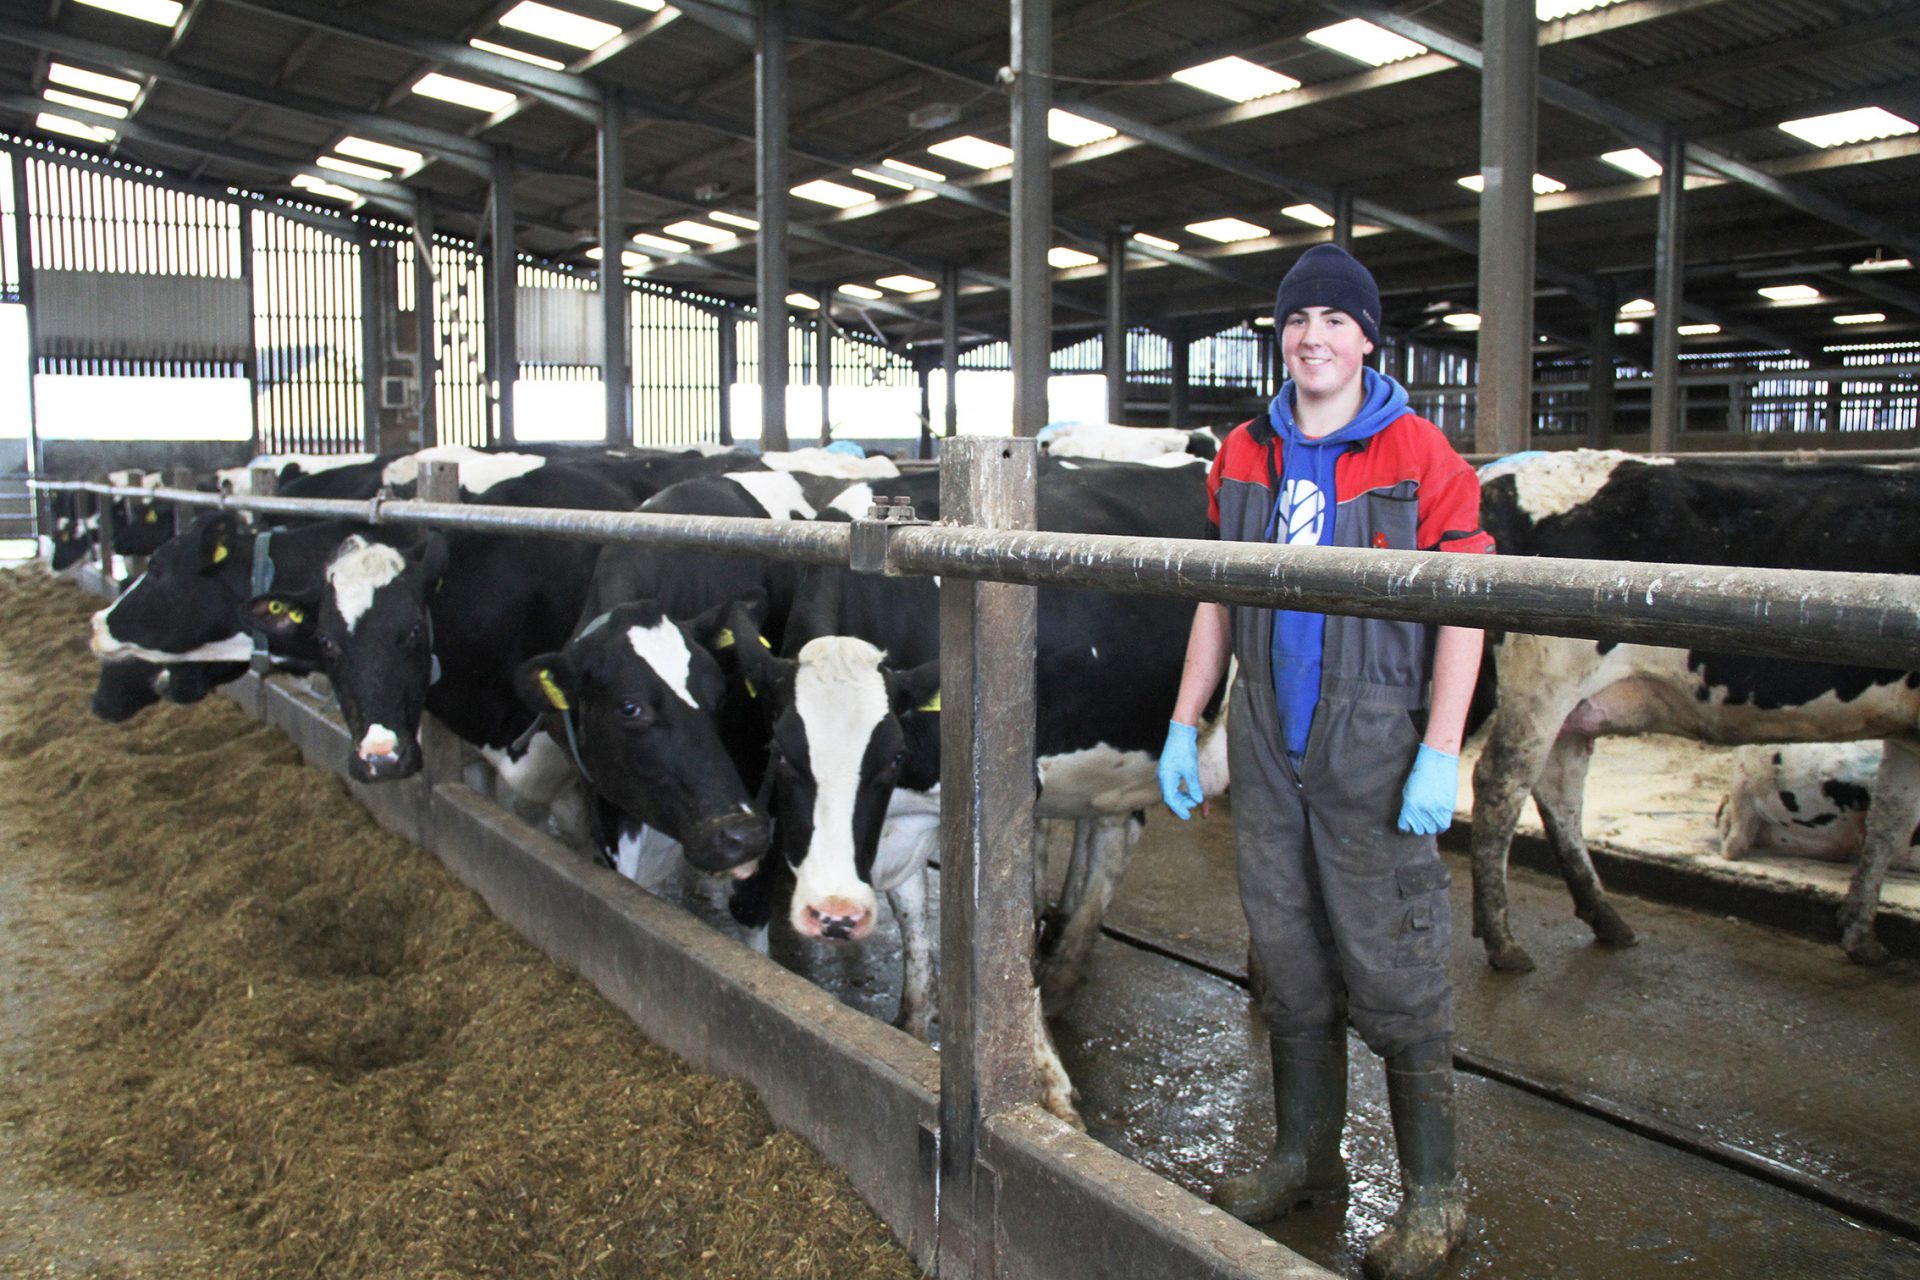 Student standing in a cow shed with cows.